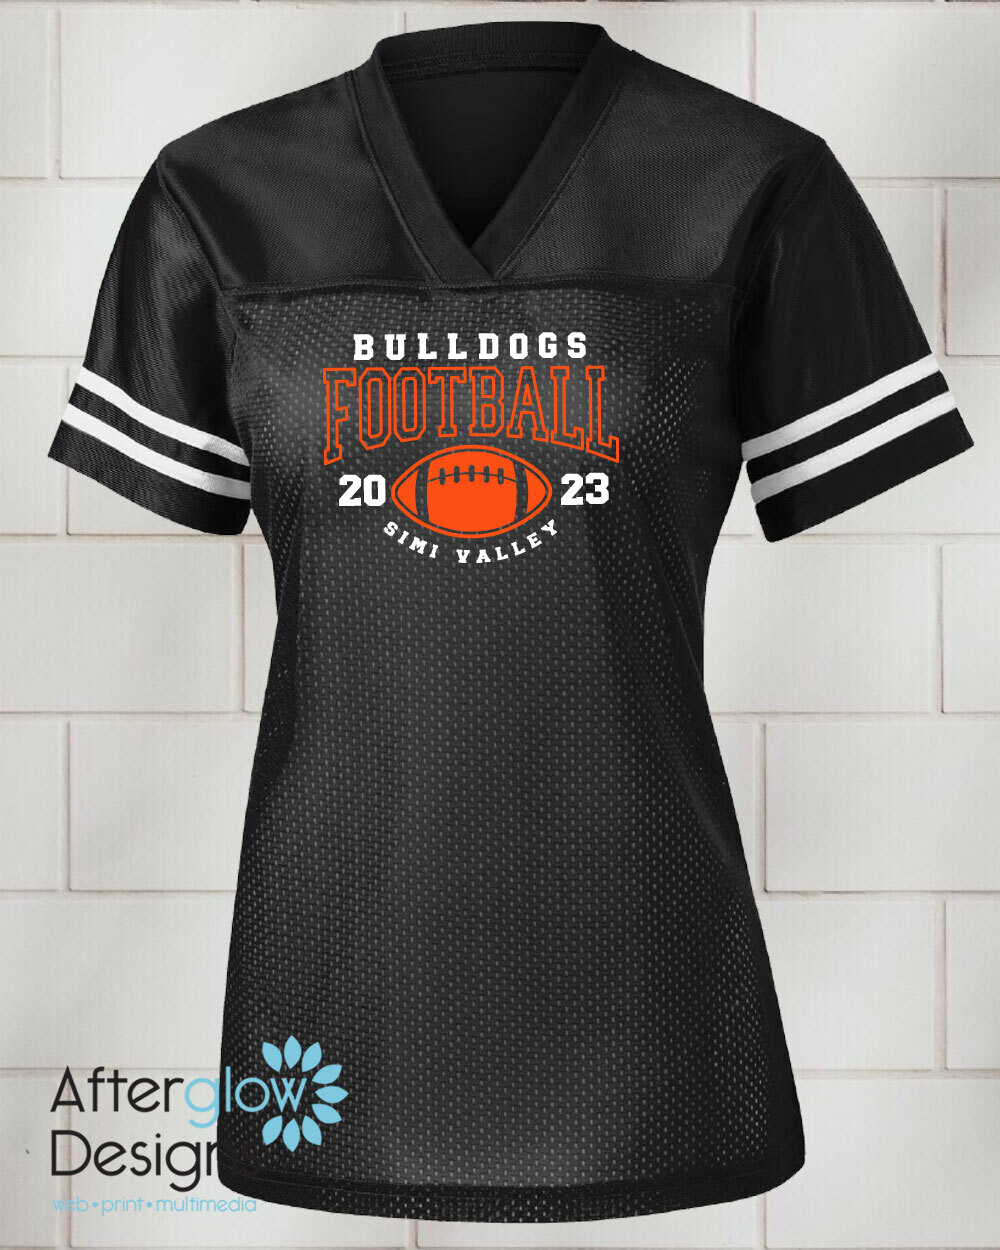 2023 Bulldogs Football Design on Ladies Black Replica Jersey – Cagers SV Basketball Online Store